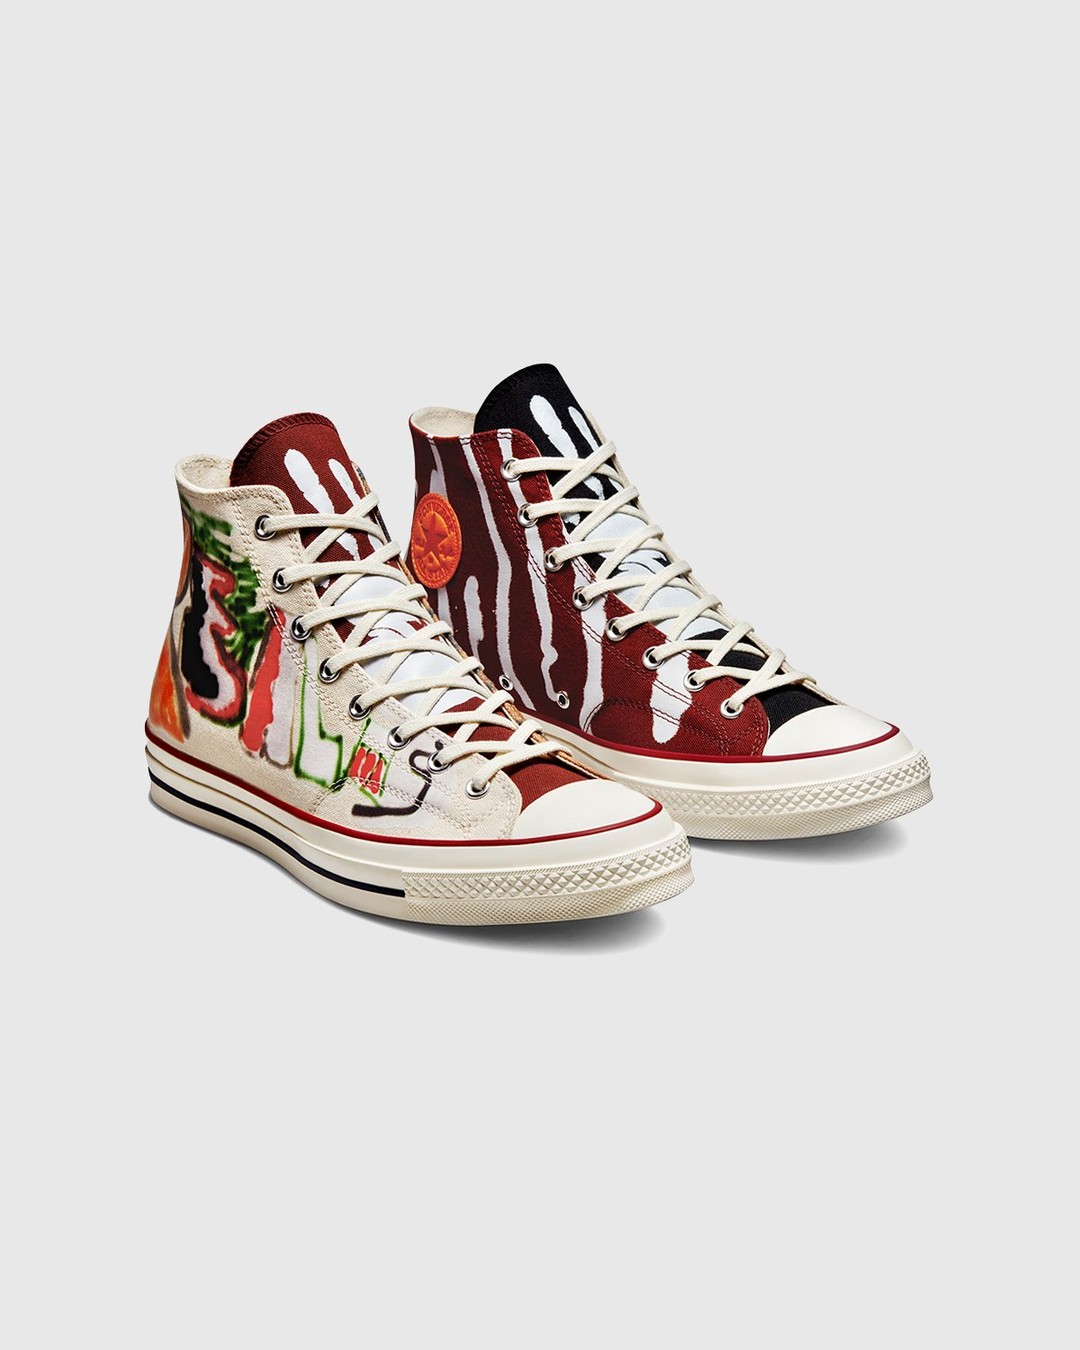 Converse x Come Tees – Chuck 70 Hi White/Multi/Egret - High Top Sneakers - Red - Image 3